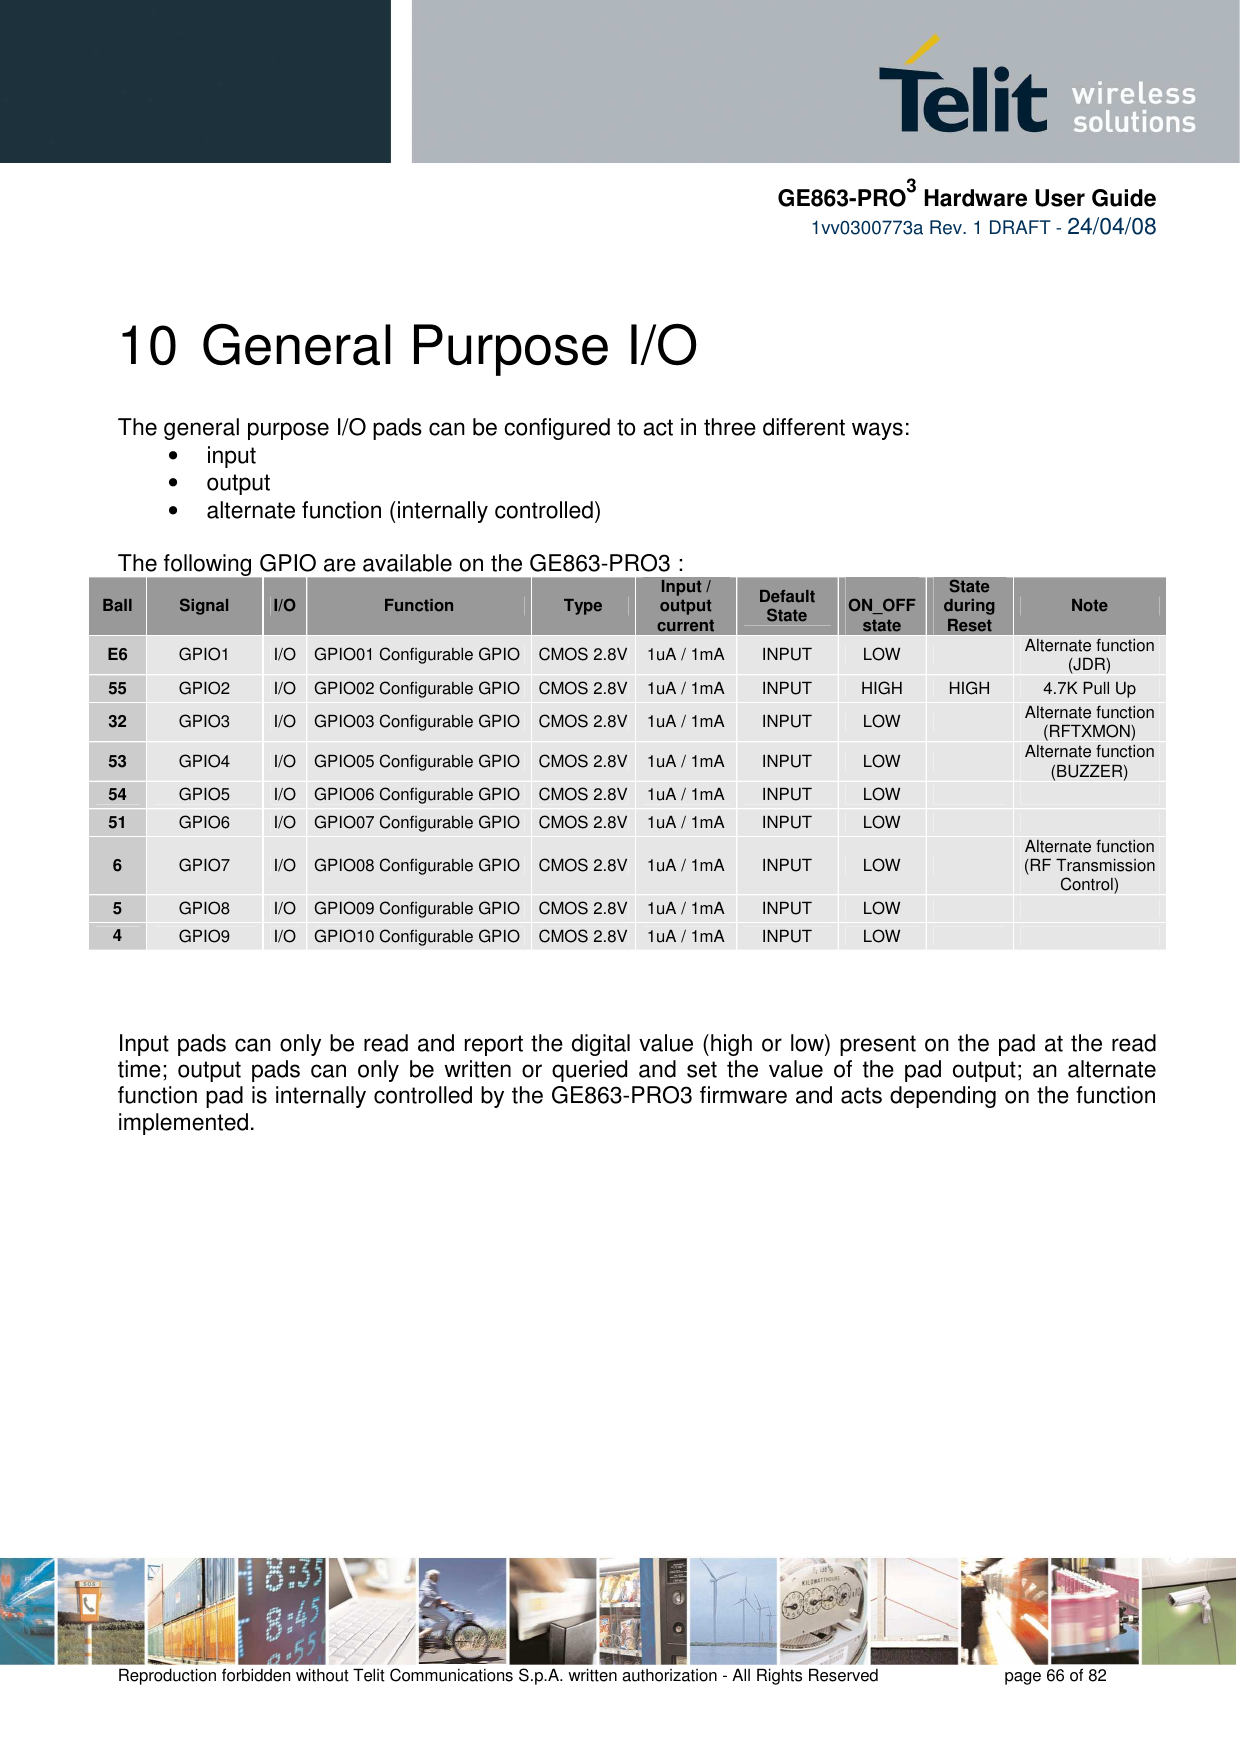     GE863-PRO3 Hardware User Guide  1vv0300773a Rev. 1 DRAFT - 24/04/08    Reproduction forbidden without Telit Communications S.p.A. written authorization - All Rights Reserved    page 66 of 82  10 General Purpose I/O The general purpose I/O pads can be configured to act in three different ways: •  input •  output •  alternate function (internally controlled)  The following GPIO are available on the GE863-PRO3 : Ball  Signal  I/O  Function  Type  Input / output current Default State  ON_OFF state State during Reset  Note E6  GPIO1  I/O  GPIO01 Configurable GPIO  CMOS 2.8V 1uA / 1mA  INPUT  LOW    Alternate function  (JDR) 55  GPIO2  I/O  GPIO02 Configurable GPIO  CMOS 2.8V 1uA / 1mA  INPUT  HIGH  HIGH  4.7K Pull Up 32  GPIO3  I/O  GPIO03 Configurable GPIO  CMOS 2.8V 1uA / 1mA  INPUT  LOW    Alternate function (RFTXMON) 53  GPIO4  I/O  GPIO05 Configurable GPIO  CMOS 2.8V 1uA / 1mA  INPUT  LOW    Alternate function (BUZZER) 54  GPIO5  I/O  GPIO06 Configurable GPIO  CMOS 2.8V 1uA / 1mA  INPUT  LOW     51  GPIO6  I/O  GPIO07 Configurable GPIO  CMOS 2.8V 1uA / 1mA  INPUT  LOW     6  GPIO7  I/O  GPIO08 Configurable GPIO  CMOS 2.8V 1uA / 1mA  INPUT  LOW    Alternate function  (RF Transmission Control) 5  GPIO8  I/O  GPIO09 Configurable GPIO  CMOS 2.8V 1uA / 1mA  INPUT  LOW     4  GPIO9  I/O  GPIO10 Configurable GPIO  CMOS 2.8V 1uA / 1mA  INPUT  LOW        Input pads can only be read and report the digital value (high or low) present on the pad at the read time; output  pads can  only  be written or queried and set the  value of  the pad output; an alternate function pad is internally controlled by the GE863-PRO3 firmware and acts depending on the function implemented.   